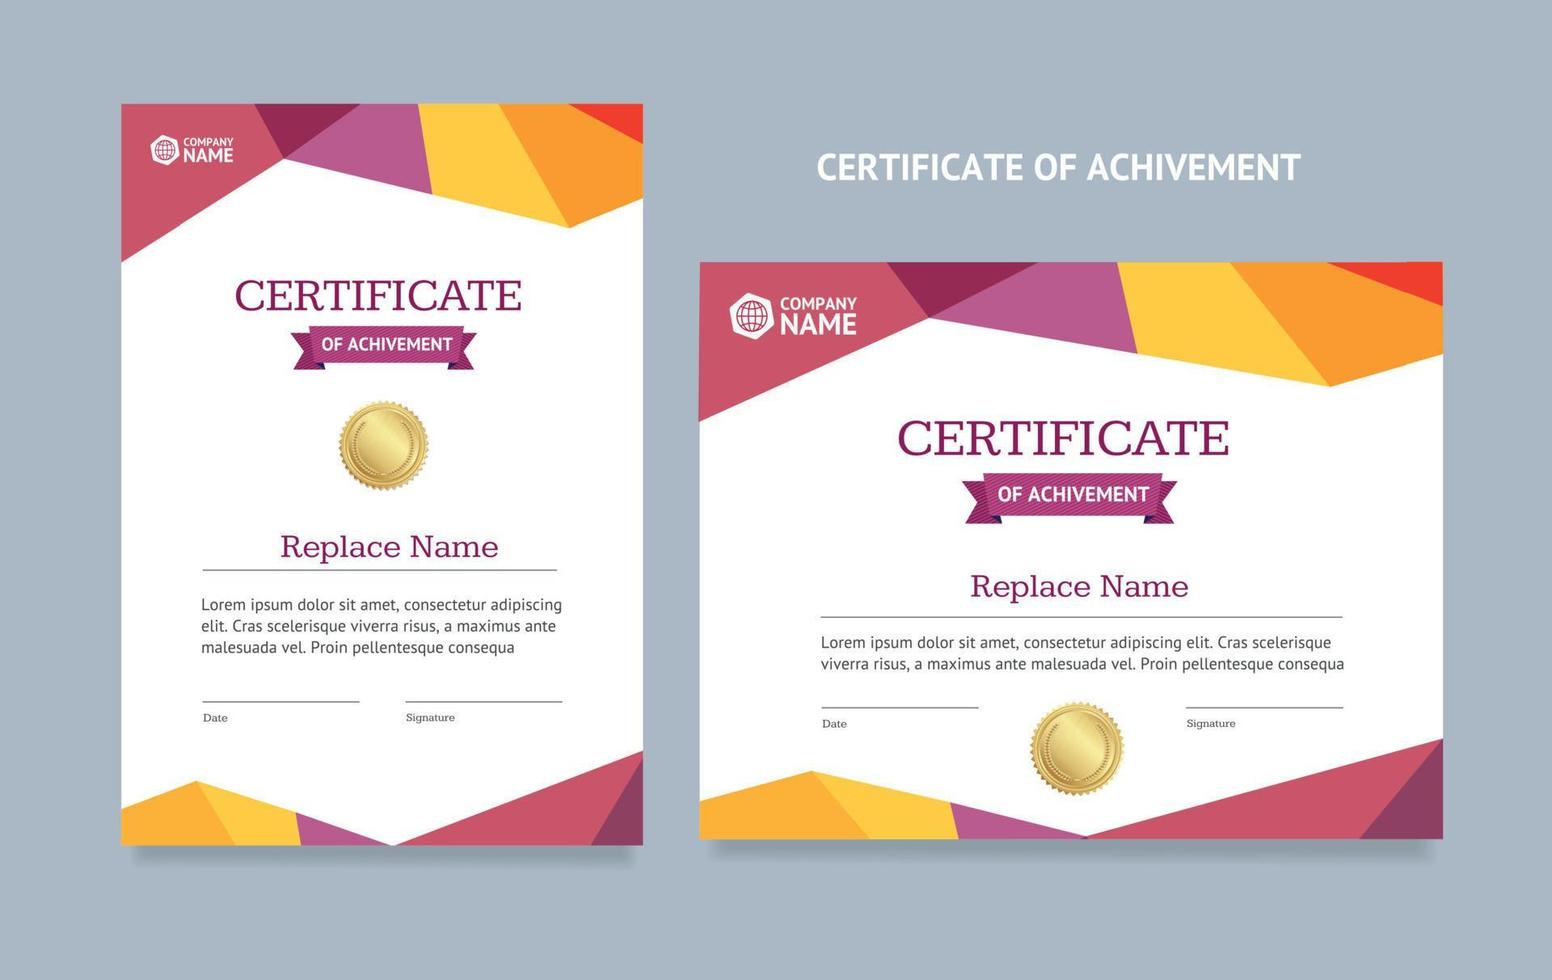 Template Certificate of Achievement Vecrtical and Horizontal Set. Vector